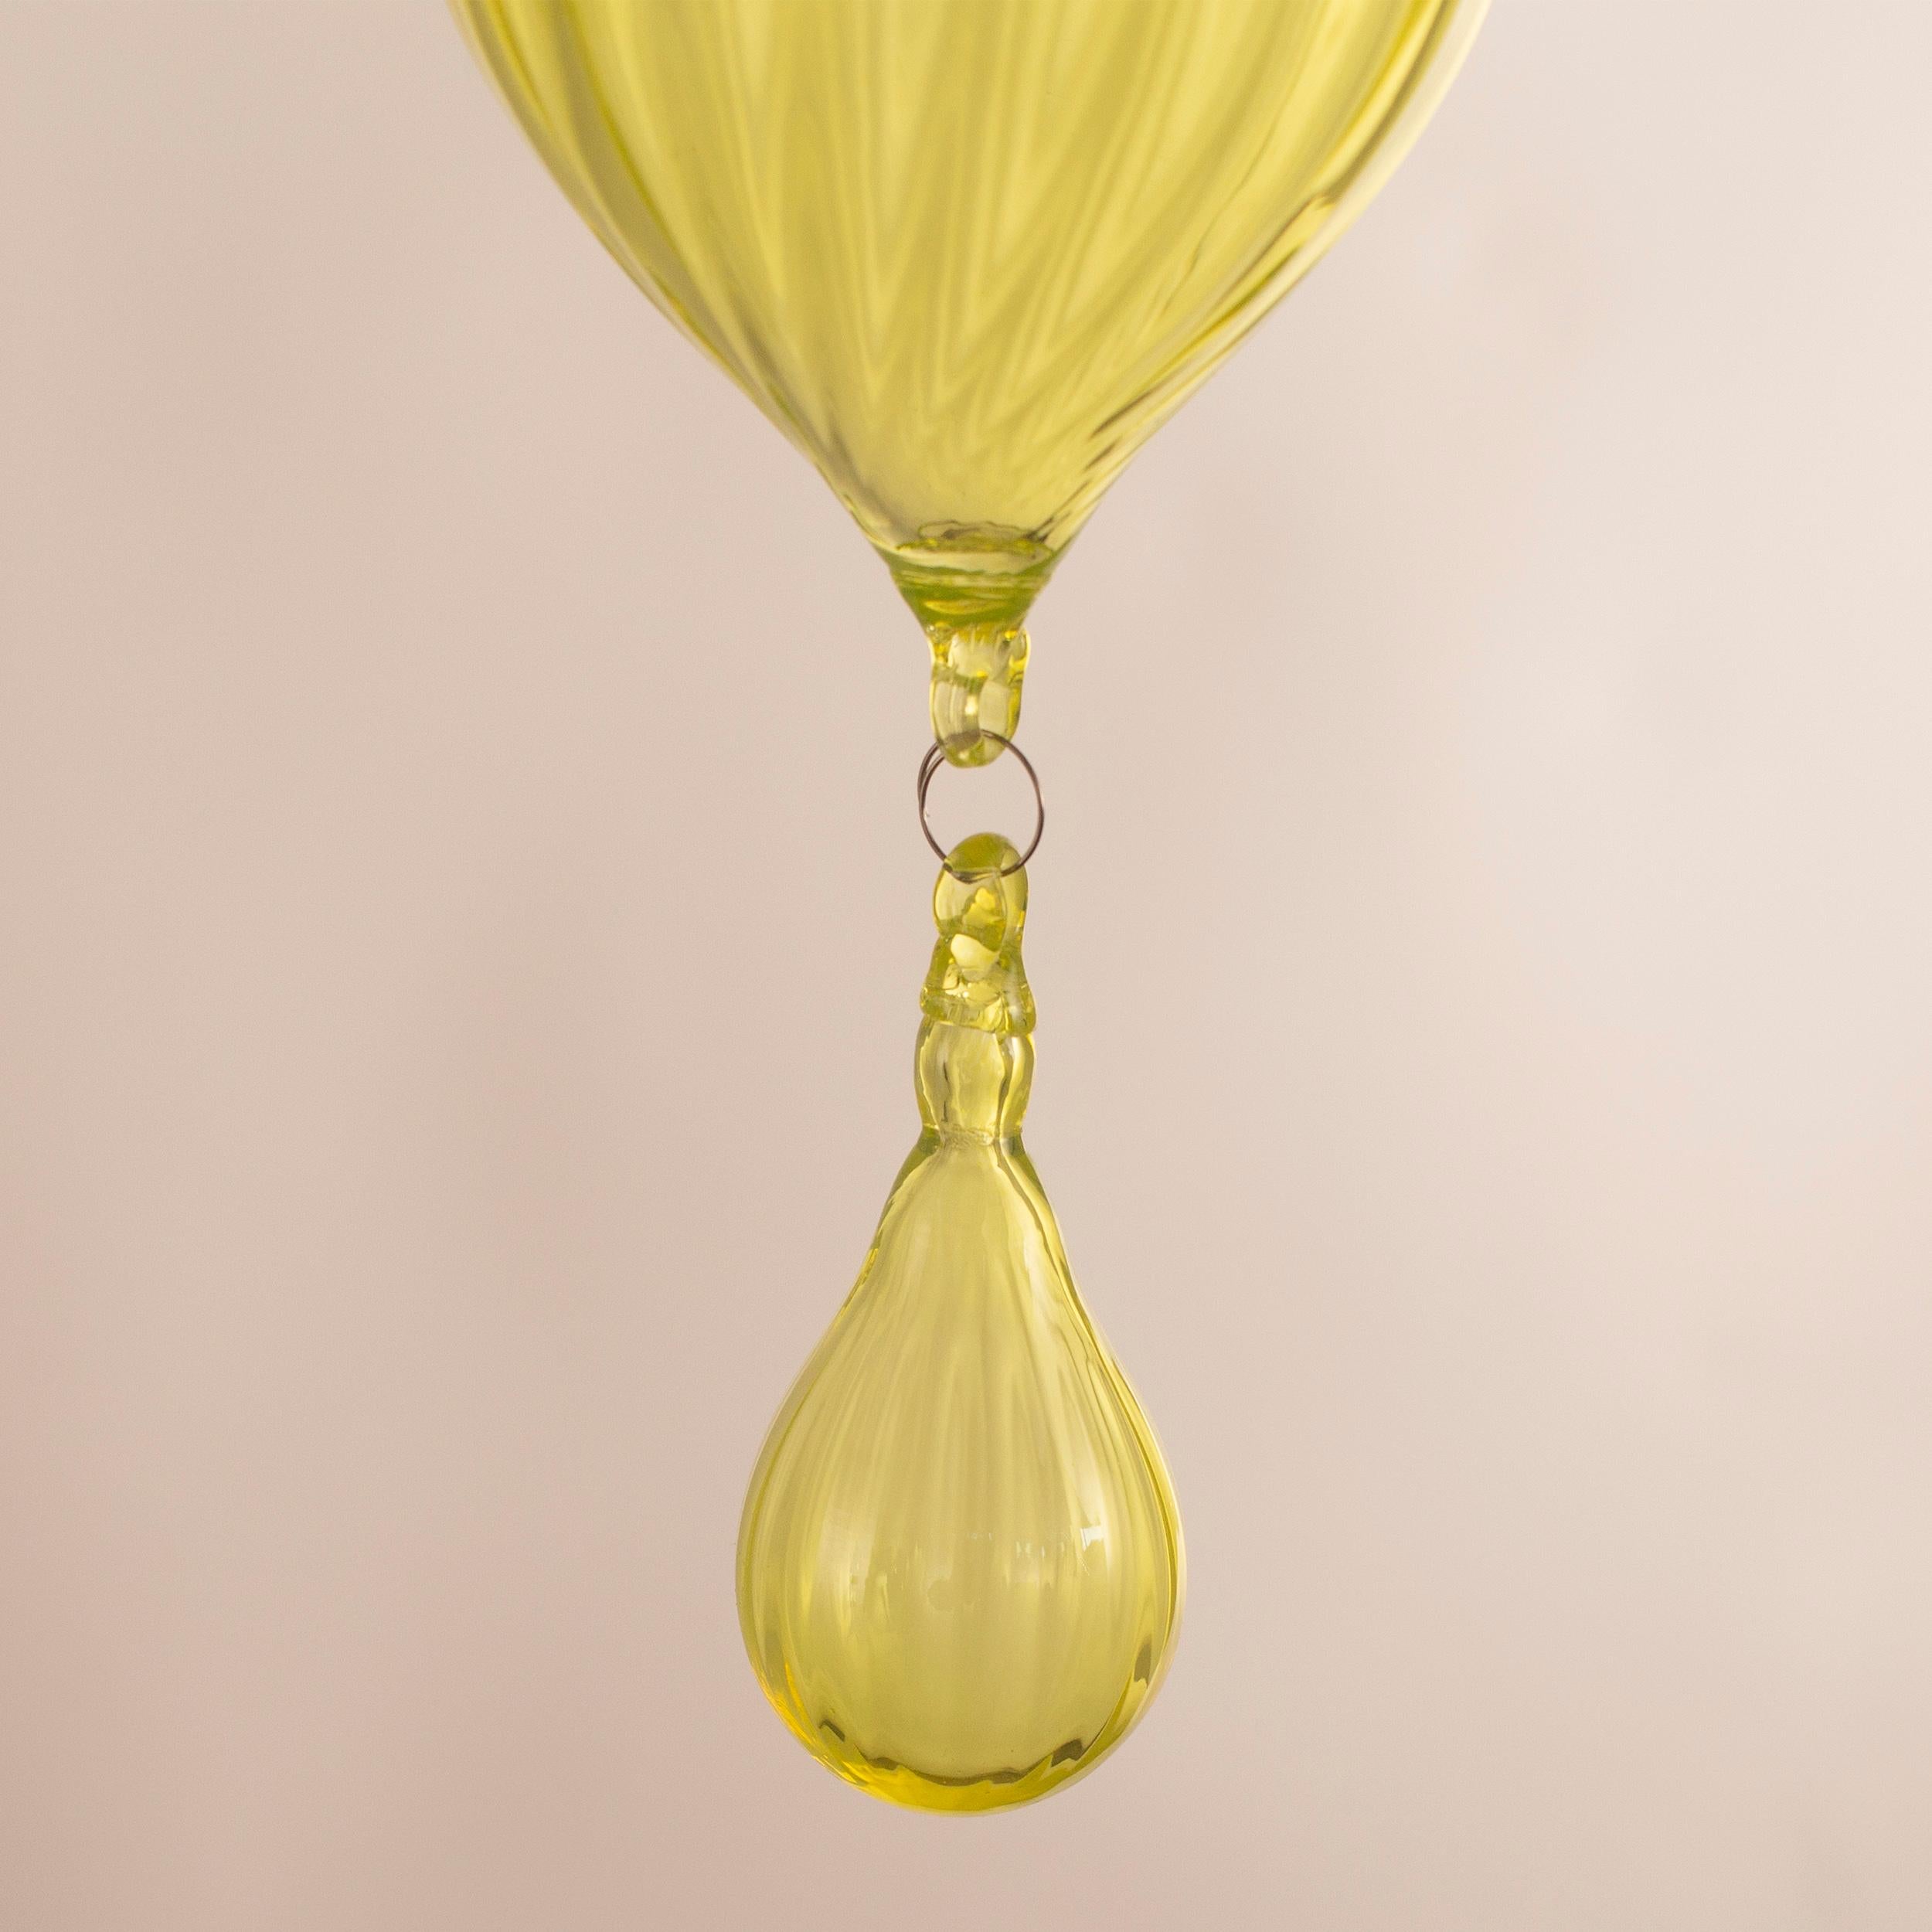 Simplicissimus 360 chandelier, 6 lights, Yellow artistic glass by Multiforme
This collection in Murano glass is characterized by superb simplicity. It is the result of a research which harks back to the Classic Murano chandeliers with the purpose of